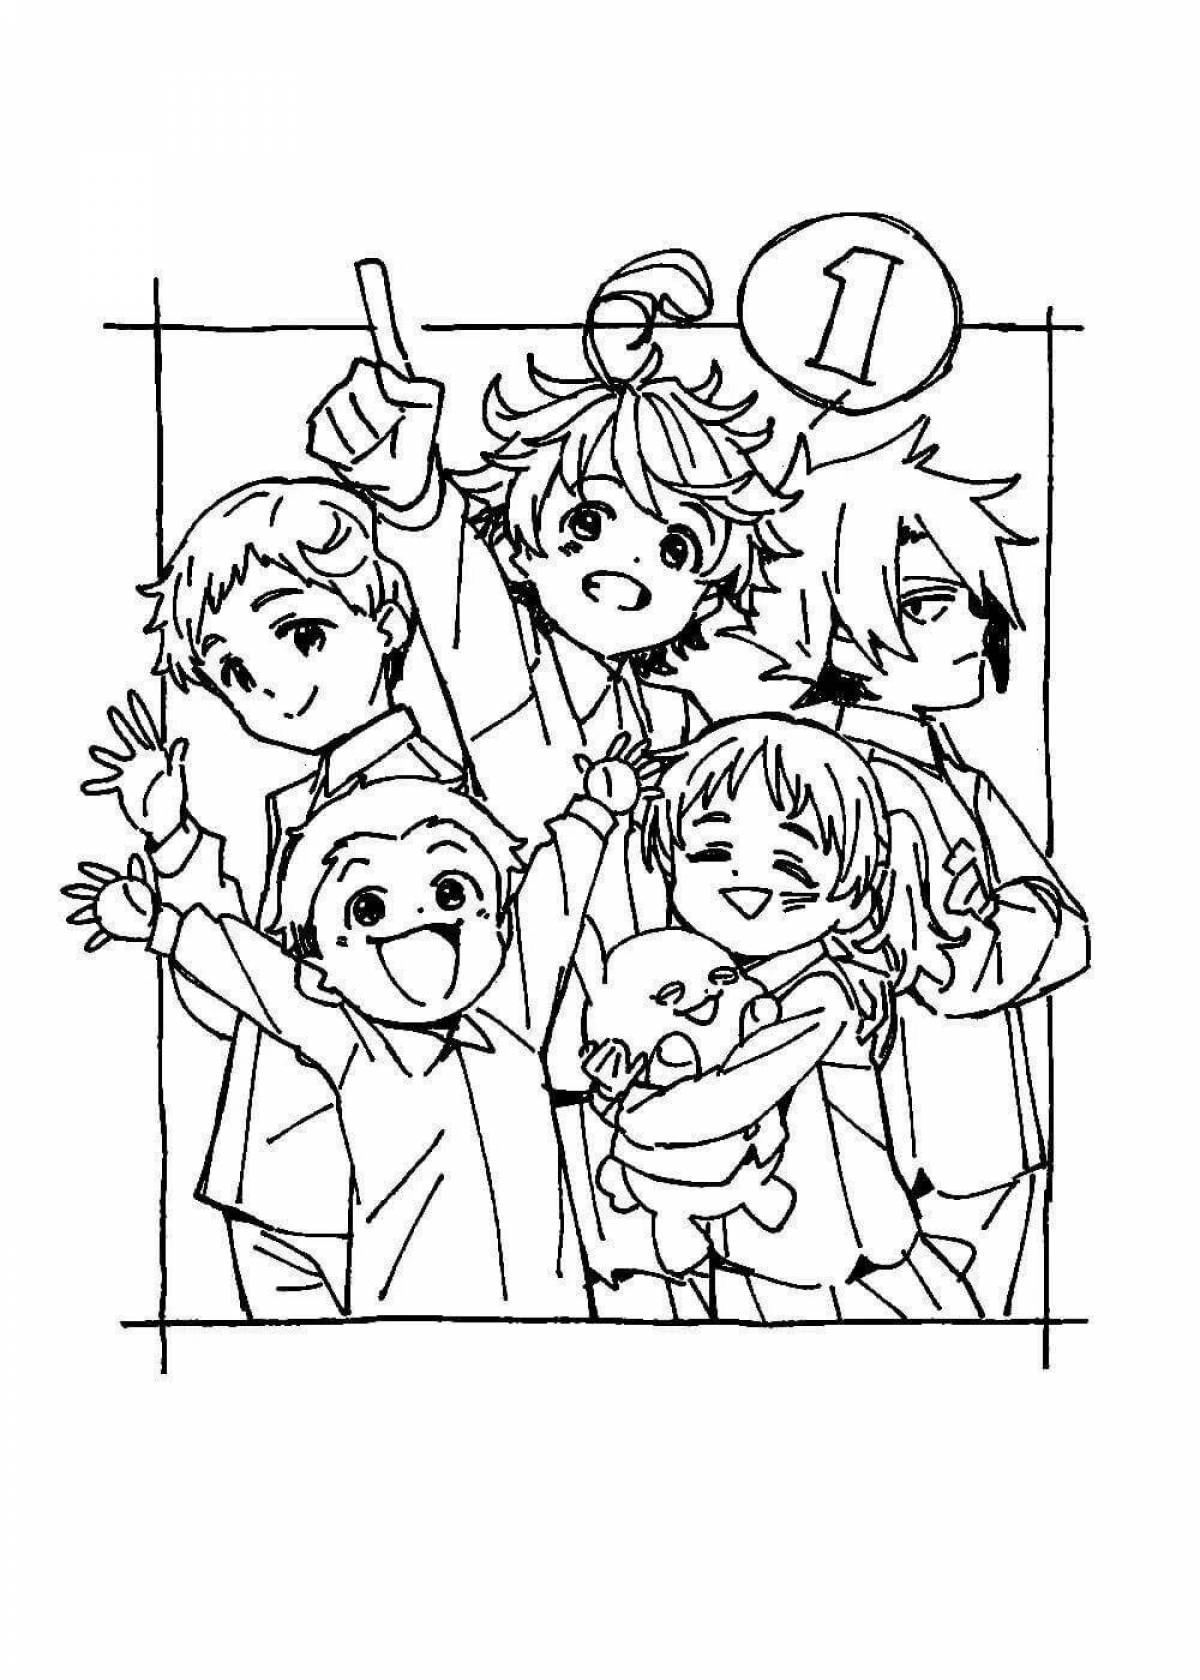 The Promised Neverland Fun Anime Coloring Page